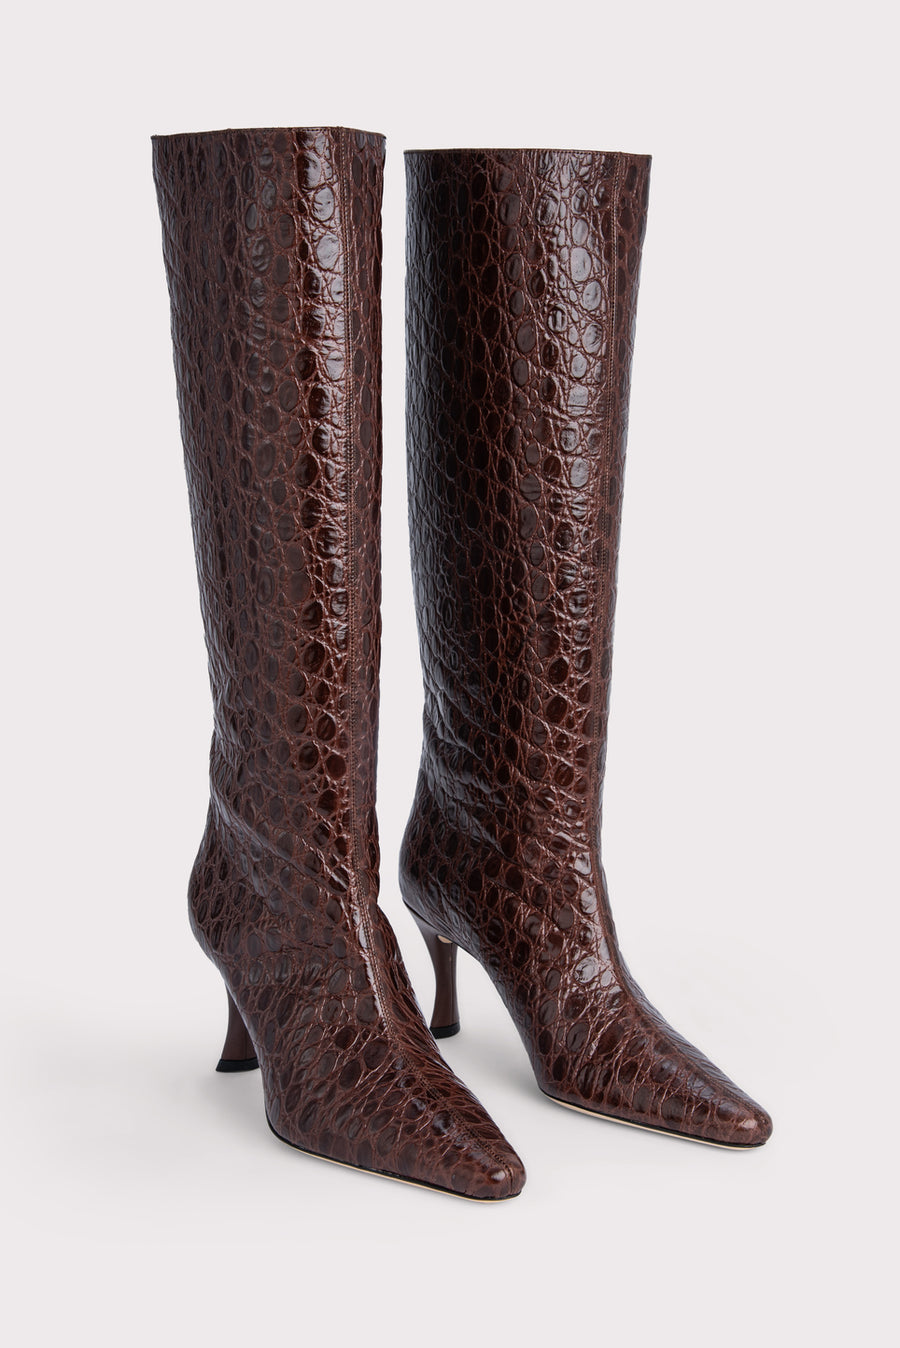 The 'Stevie' 42 are the ultimate shaft boot for this season. Made with a croc-embossed leather, they finish below the knee adding a vintage vibe and slope into a pointed toe, set on an angular heel. Pair with a midi dress for a bohemian look. 